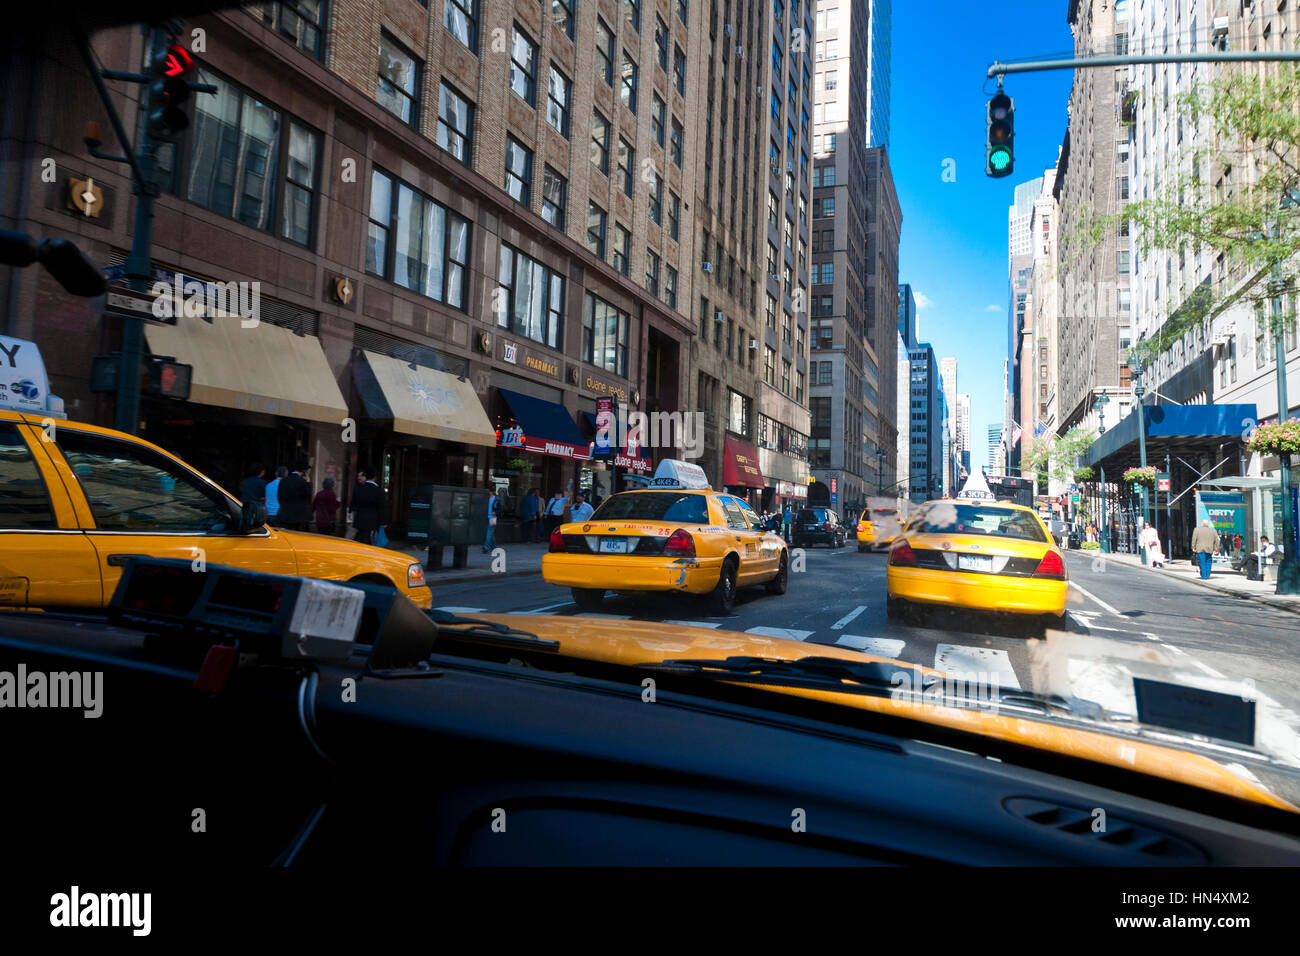 New York City, United States - September, 19 2008: Buildings and traffic on Madison Avenue viewed through the windscreen of a New York Yellow cab Stock Photo